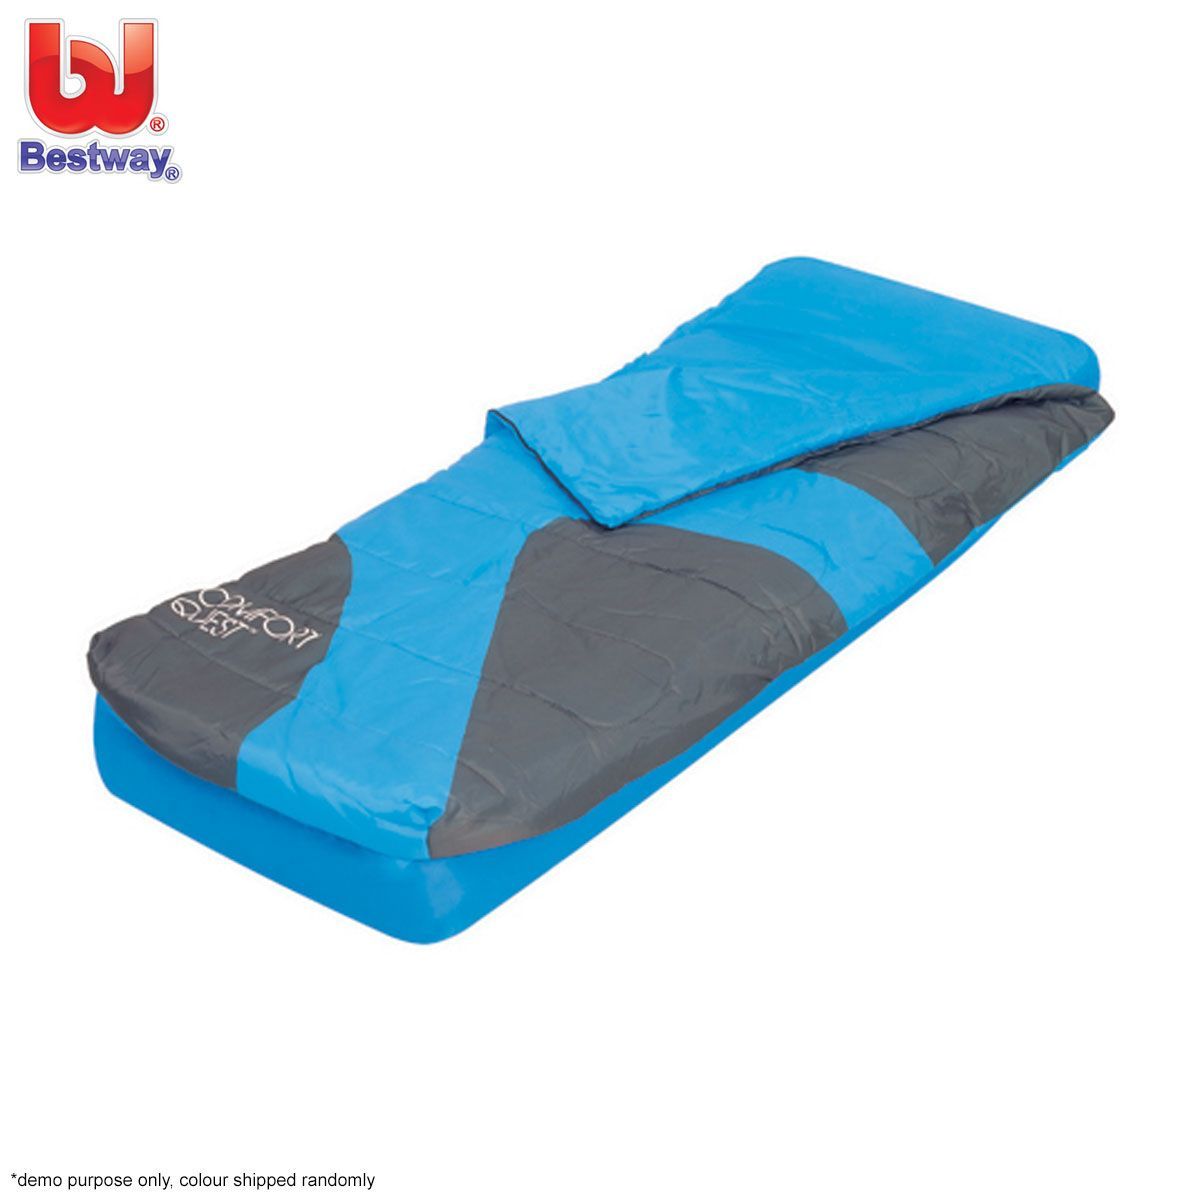 Free Shipping!Bestway 2-in-1 Fold & Rest Camping Bed